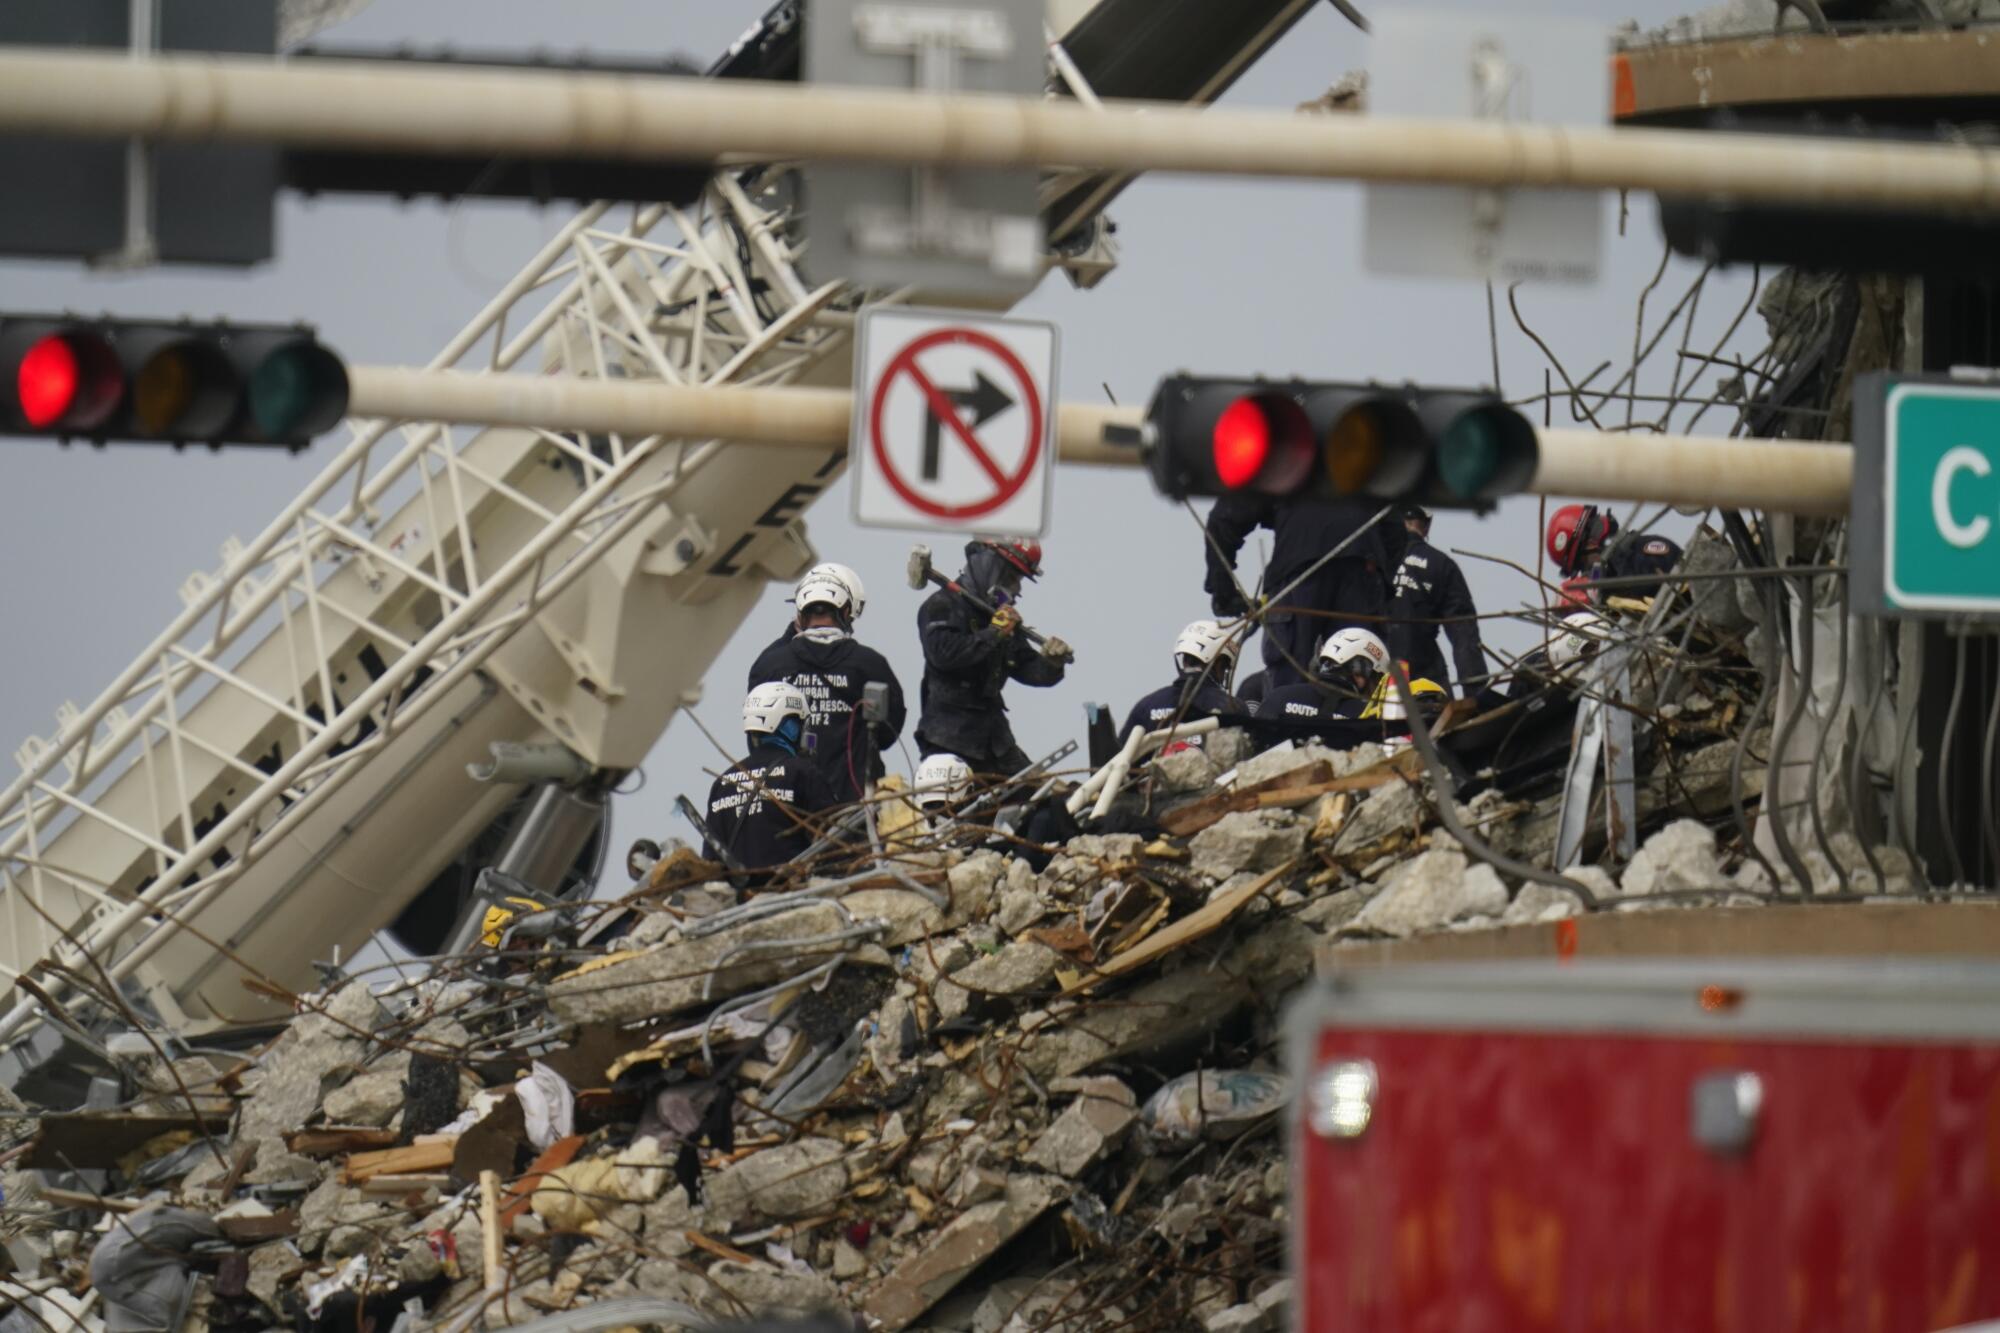 Rescuers in helmets stand atop rubble near a crane.